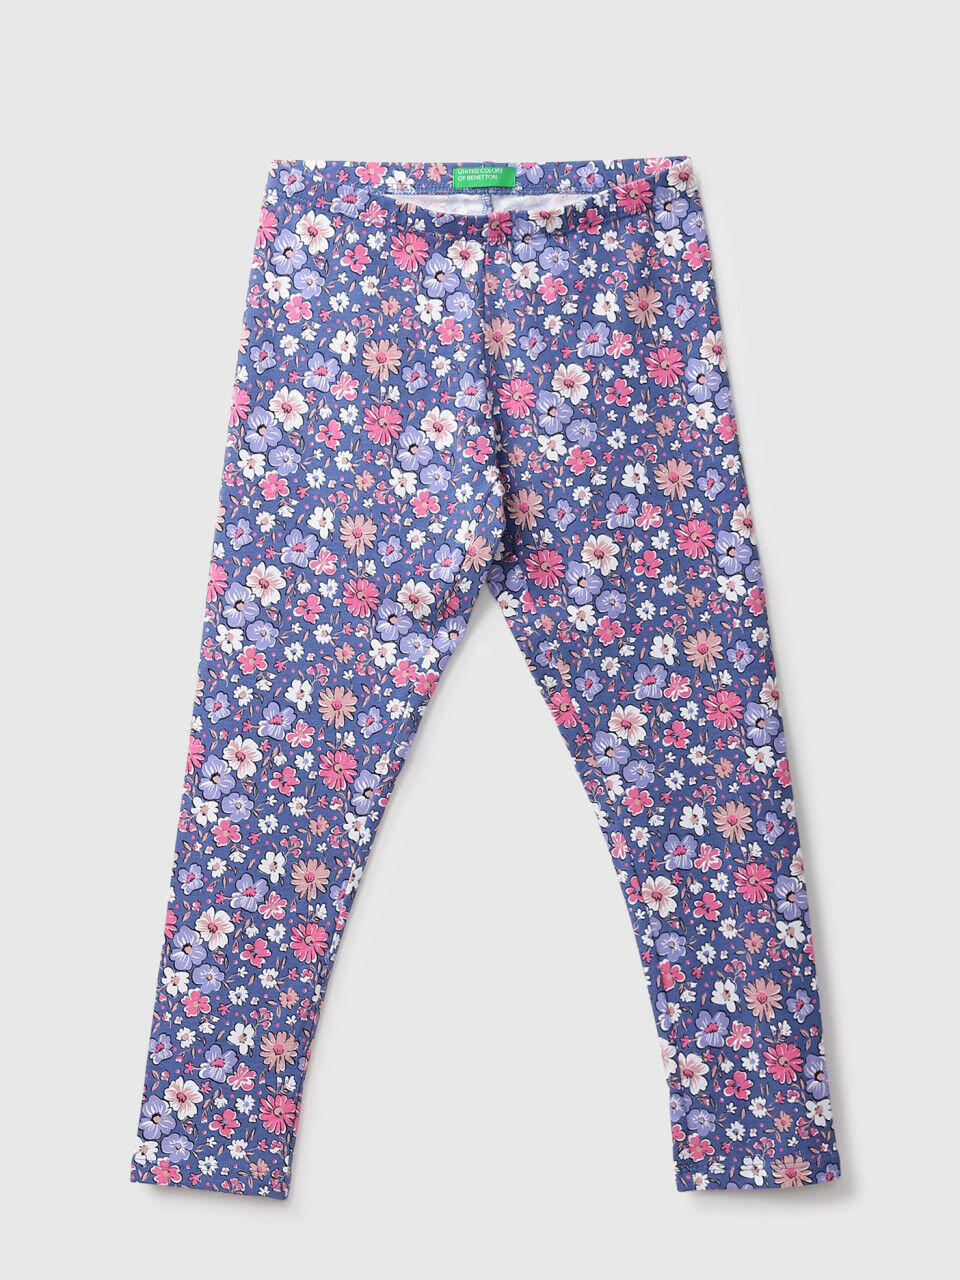 75N-Fucsia Stampa all-Over United+Colors+of+BenettonUnited Colors of Benetton Pantalone 39YNCF00Y Leggings S Bambina 